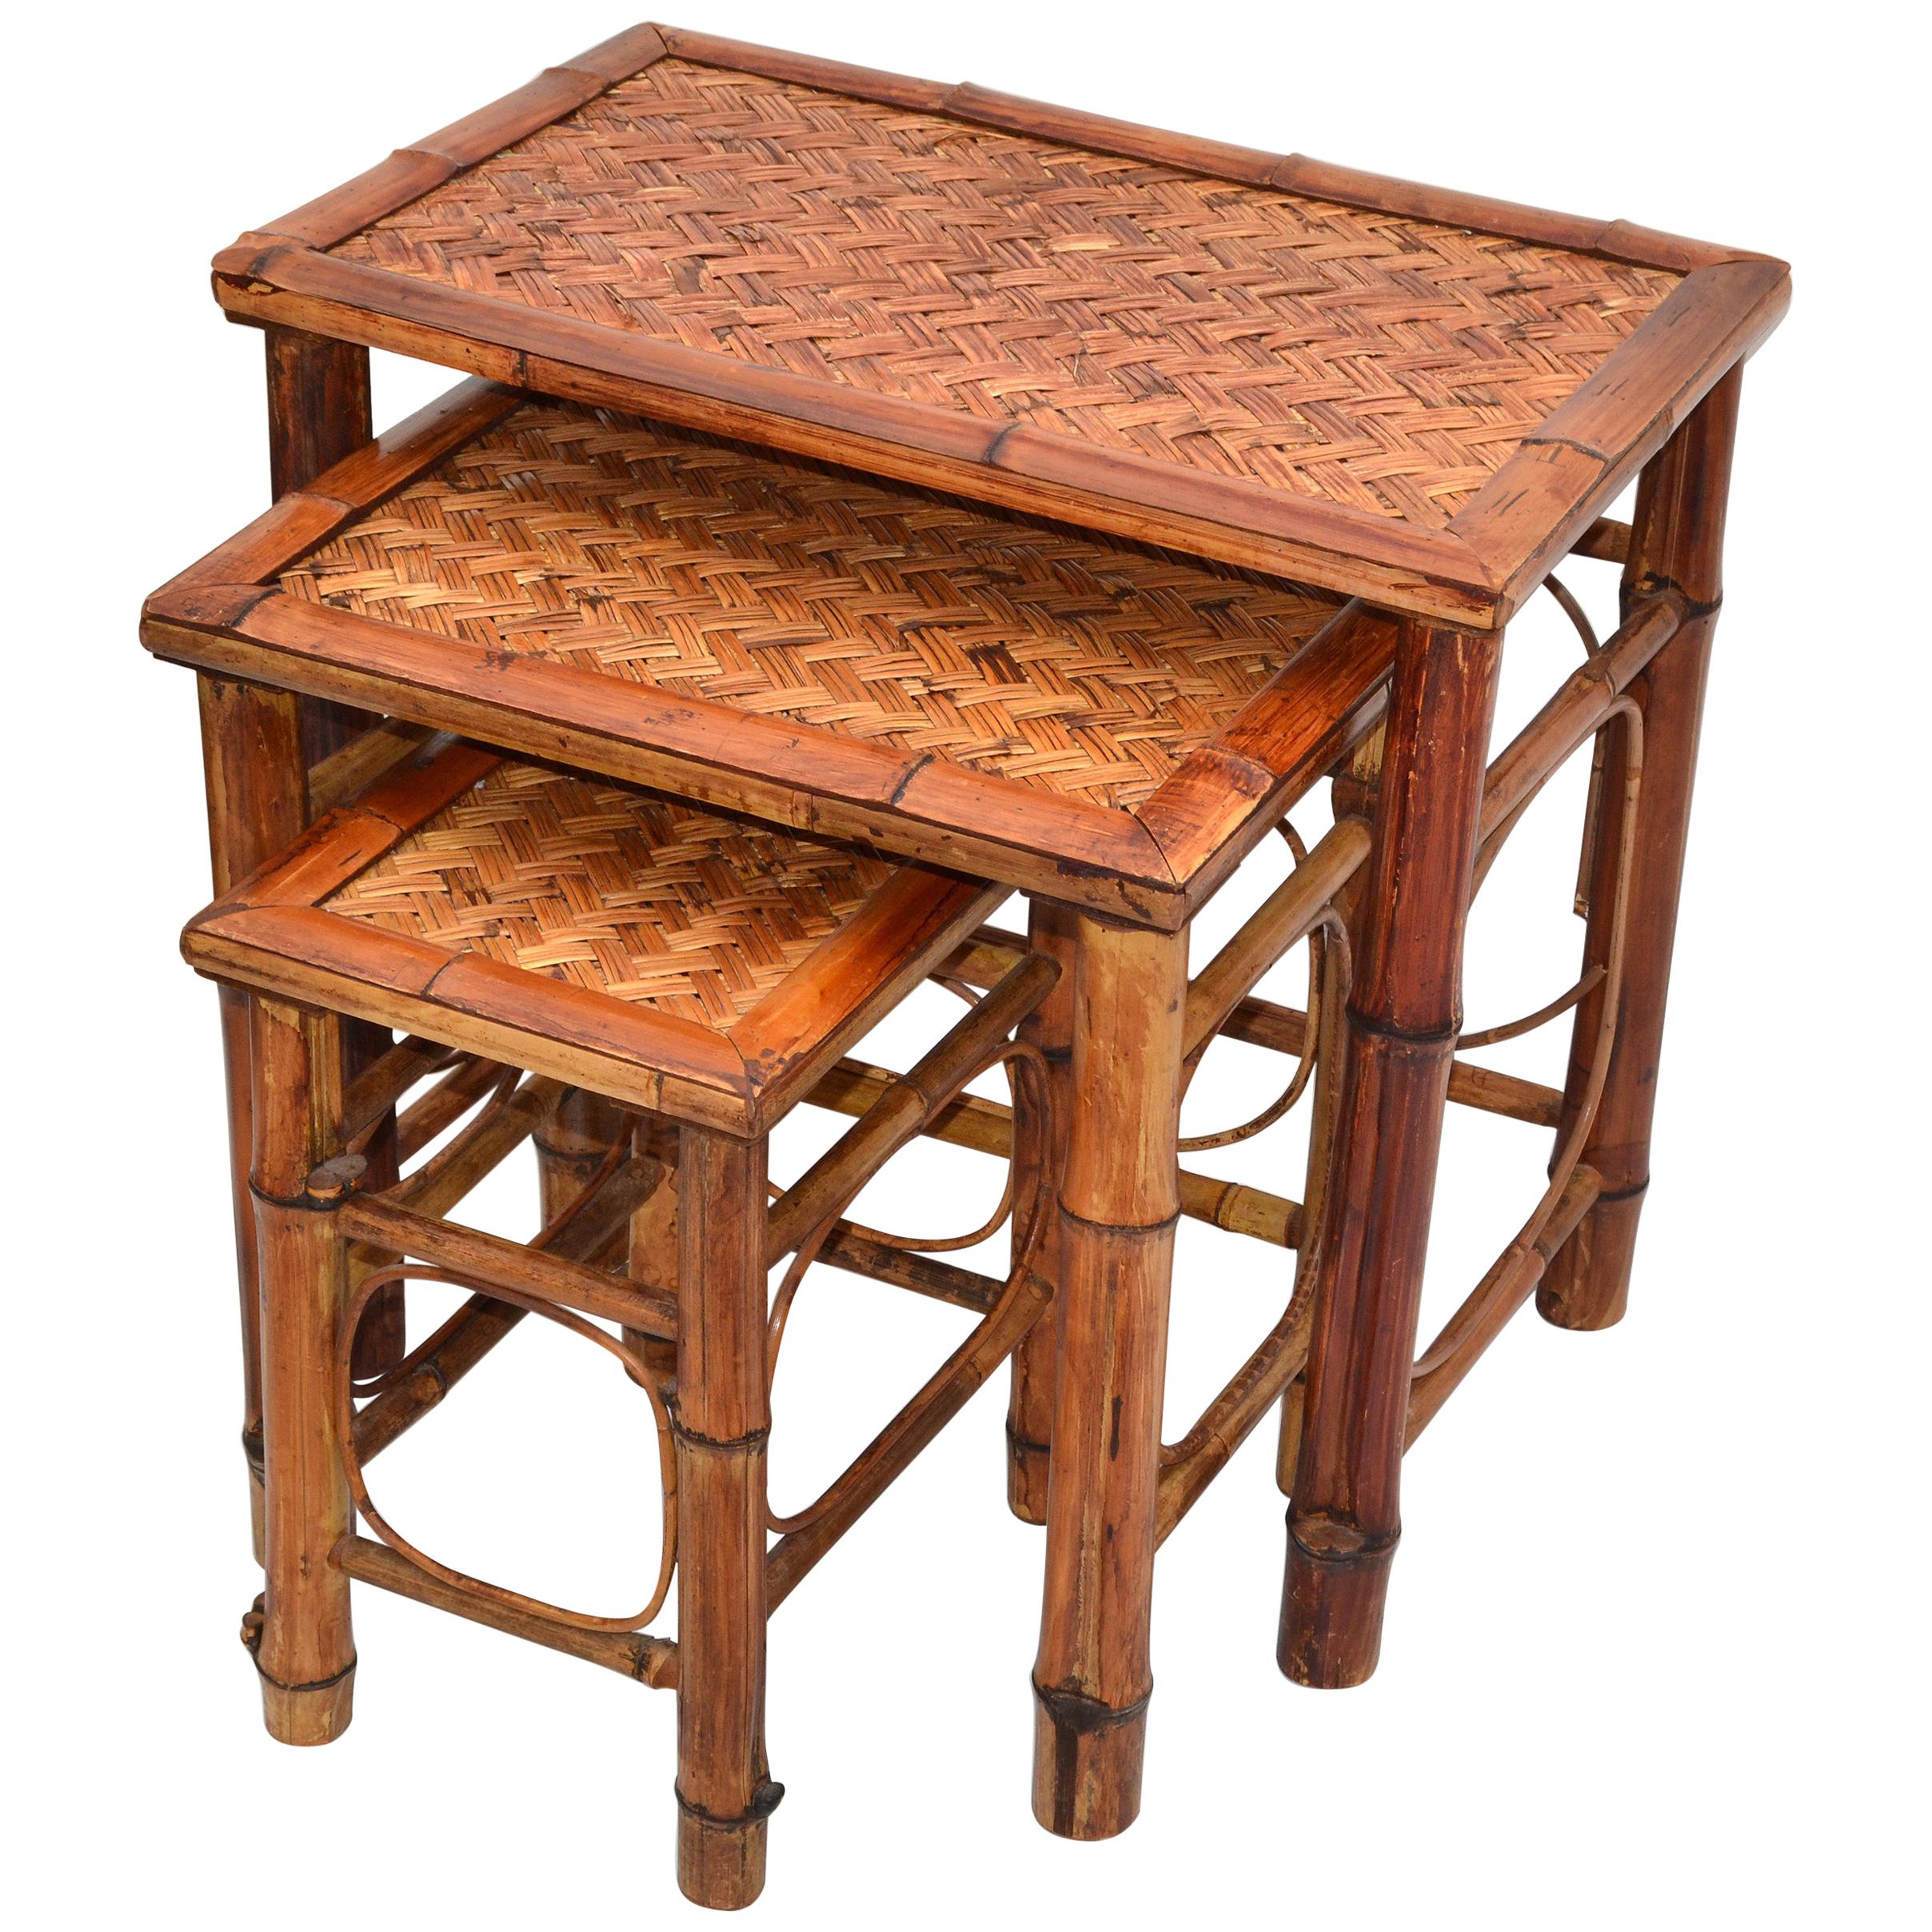 Chinoiserie Bamboo & Cane Nesting Tables Stacking Tables Handcrafted Satz von 3